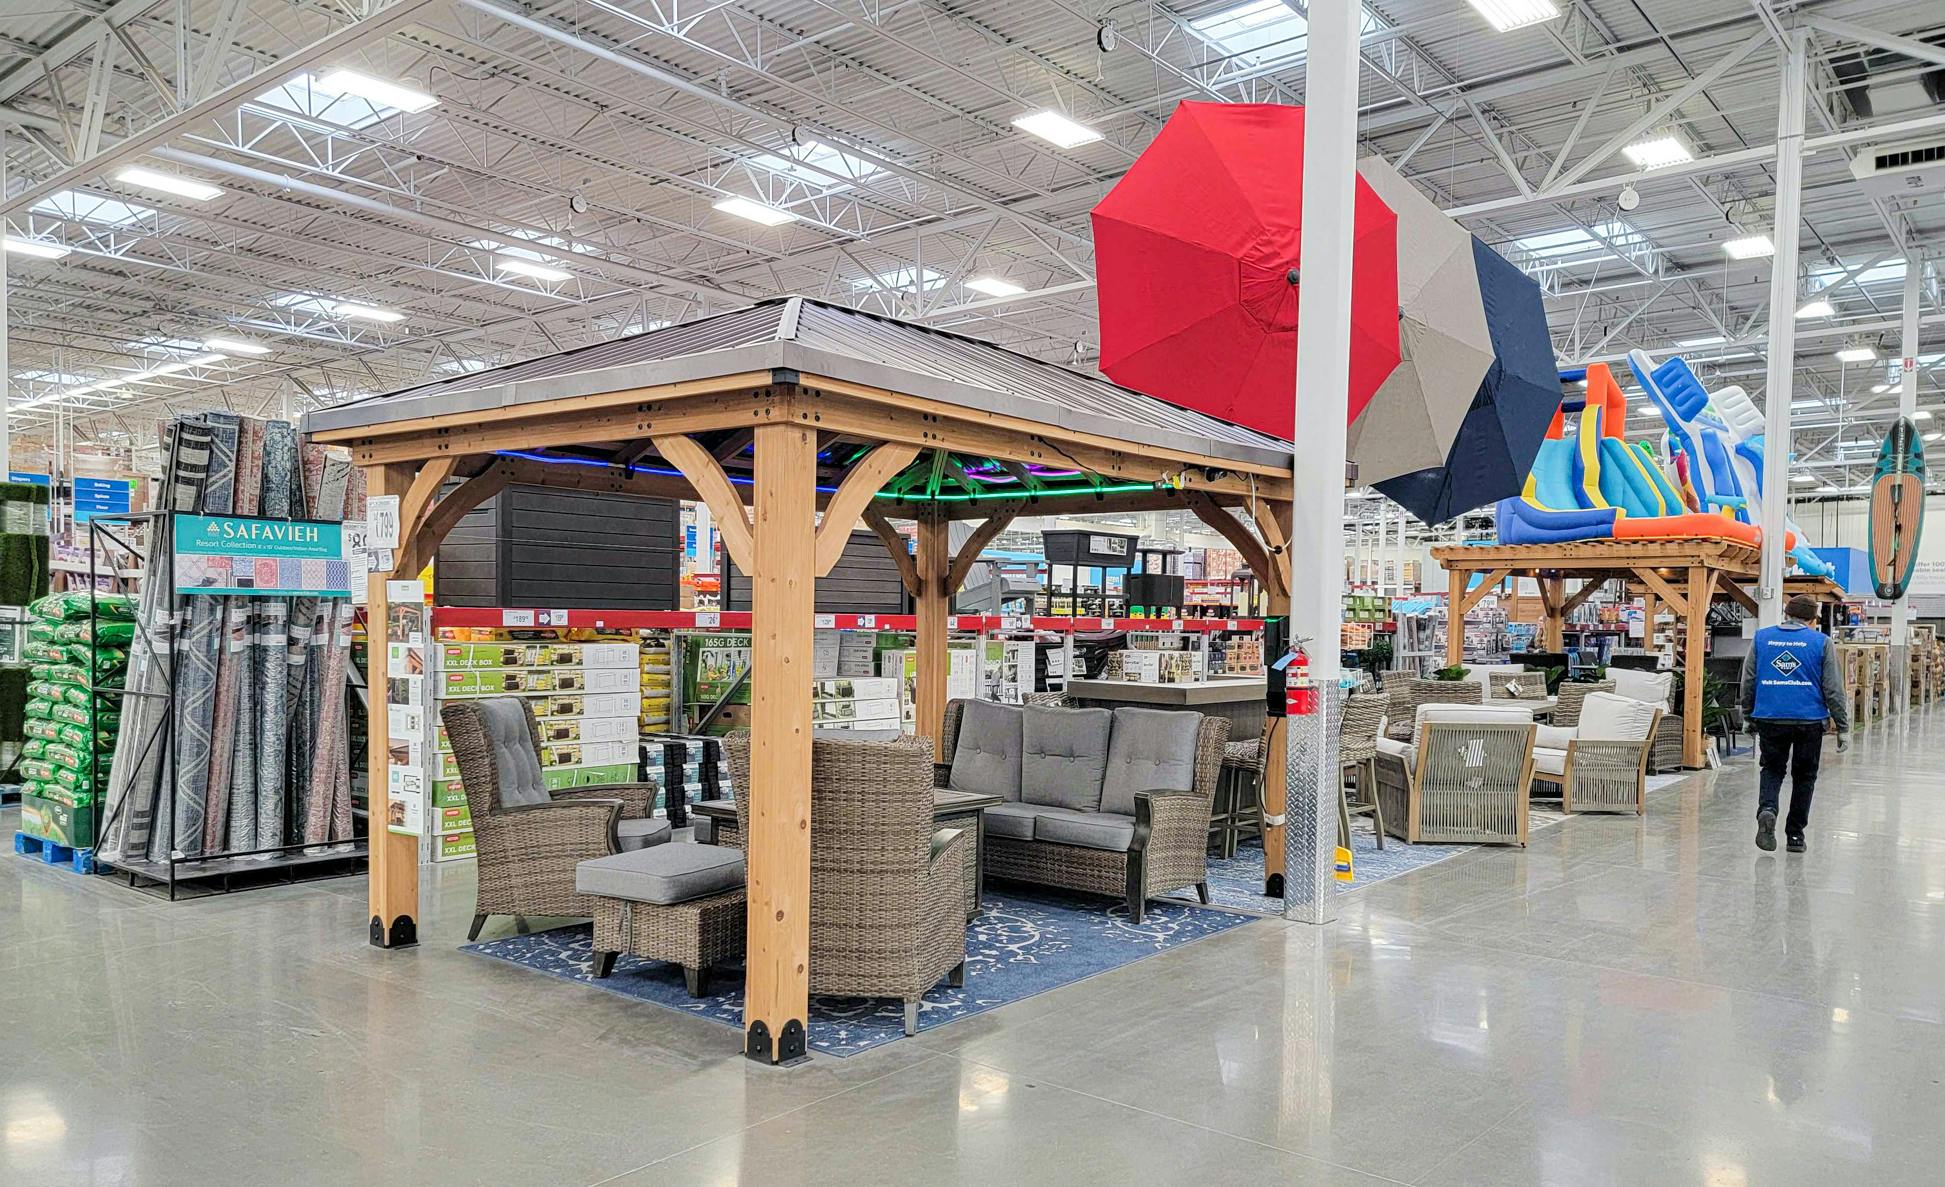 Save Up to 47% on Patio Furniture at Sam's Club - The Krazy Coupon Lady